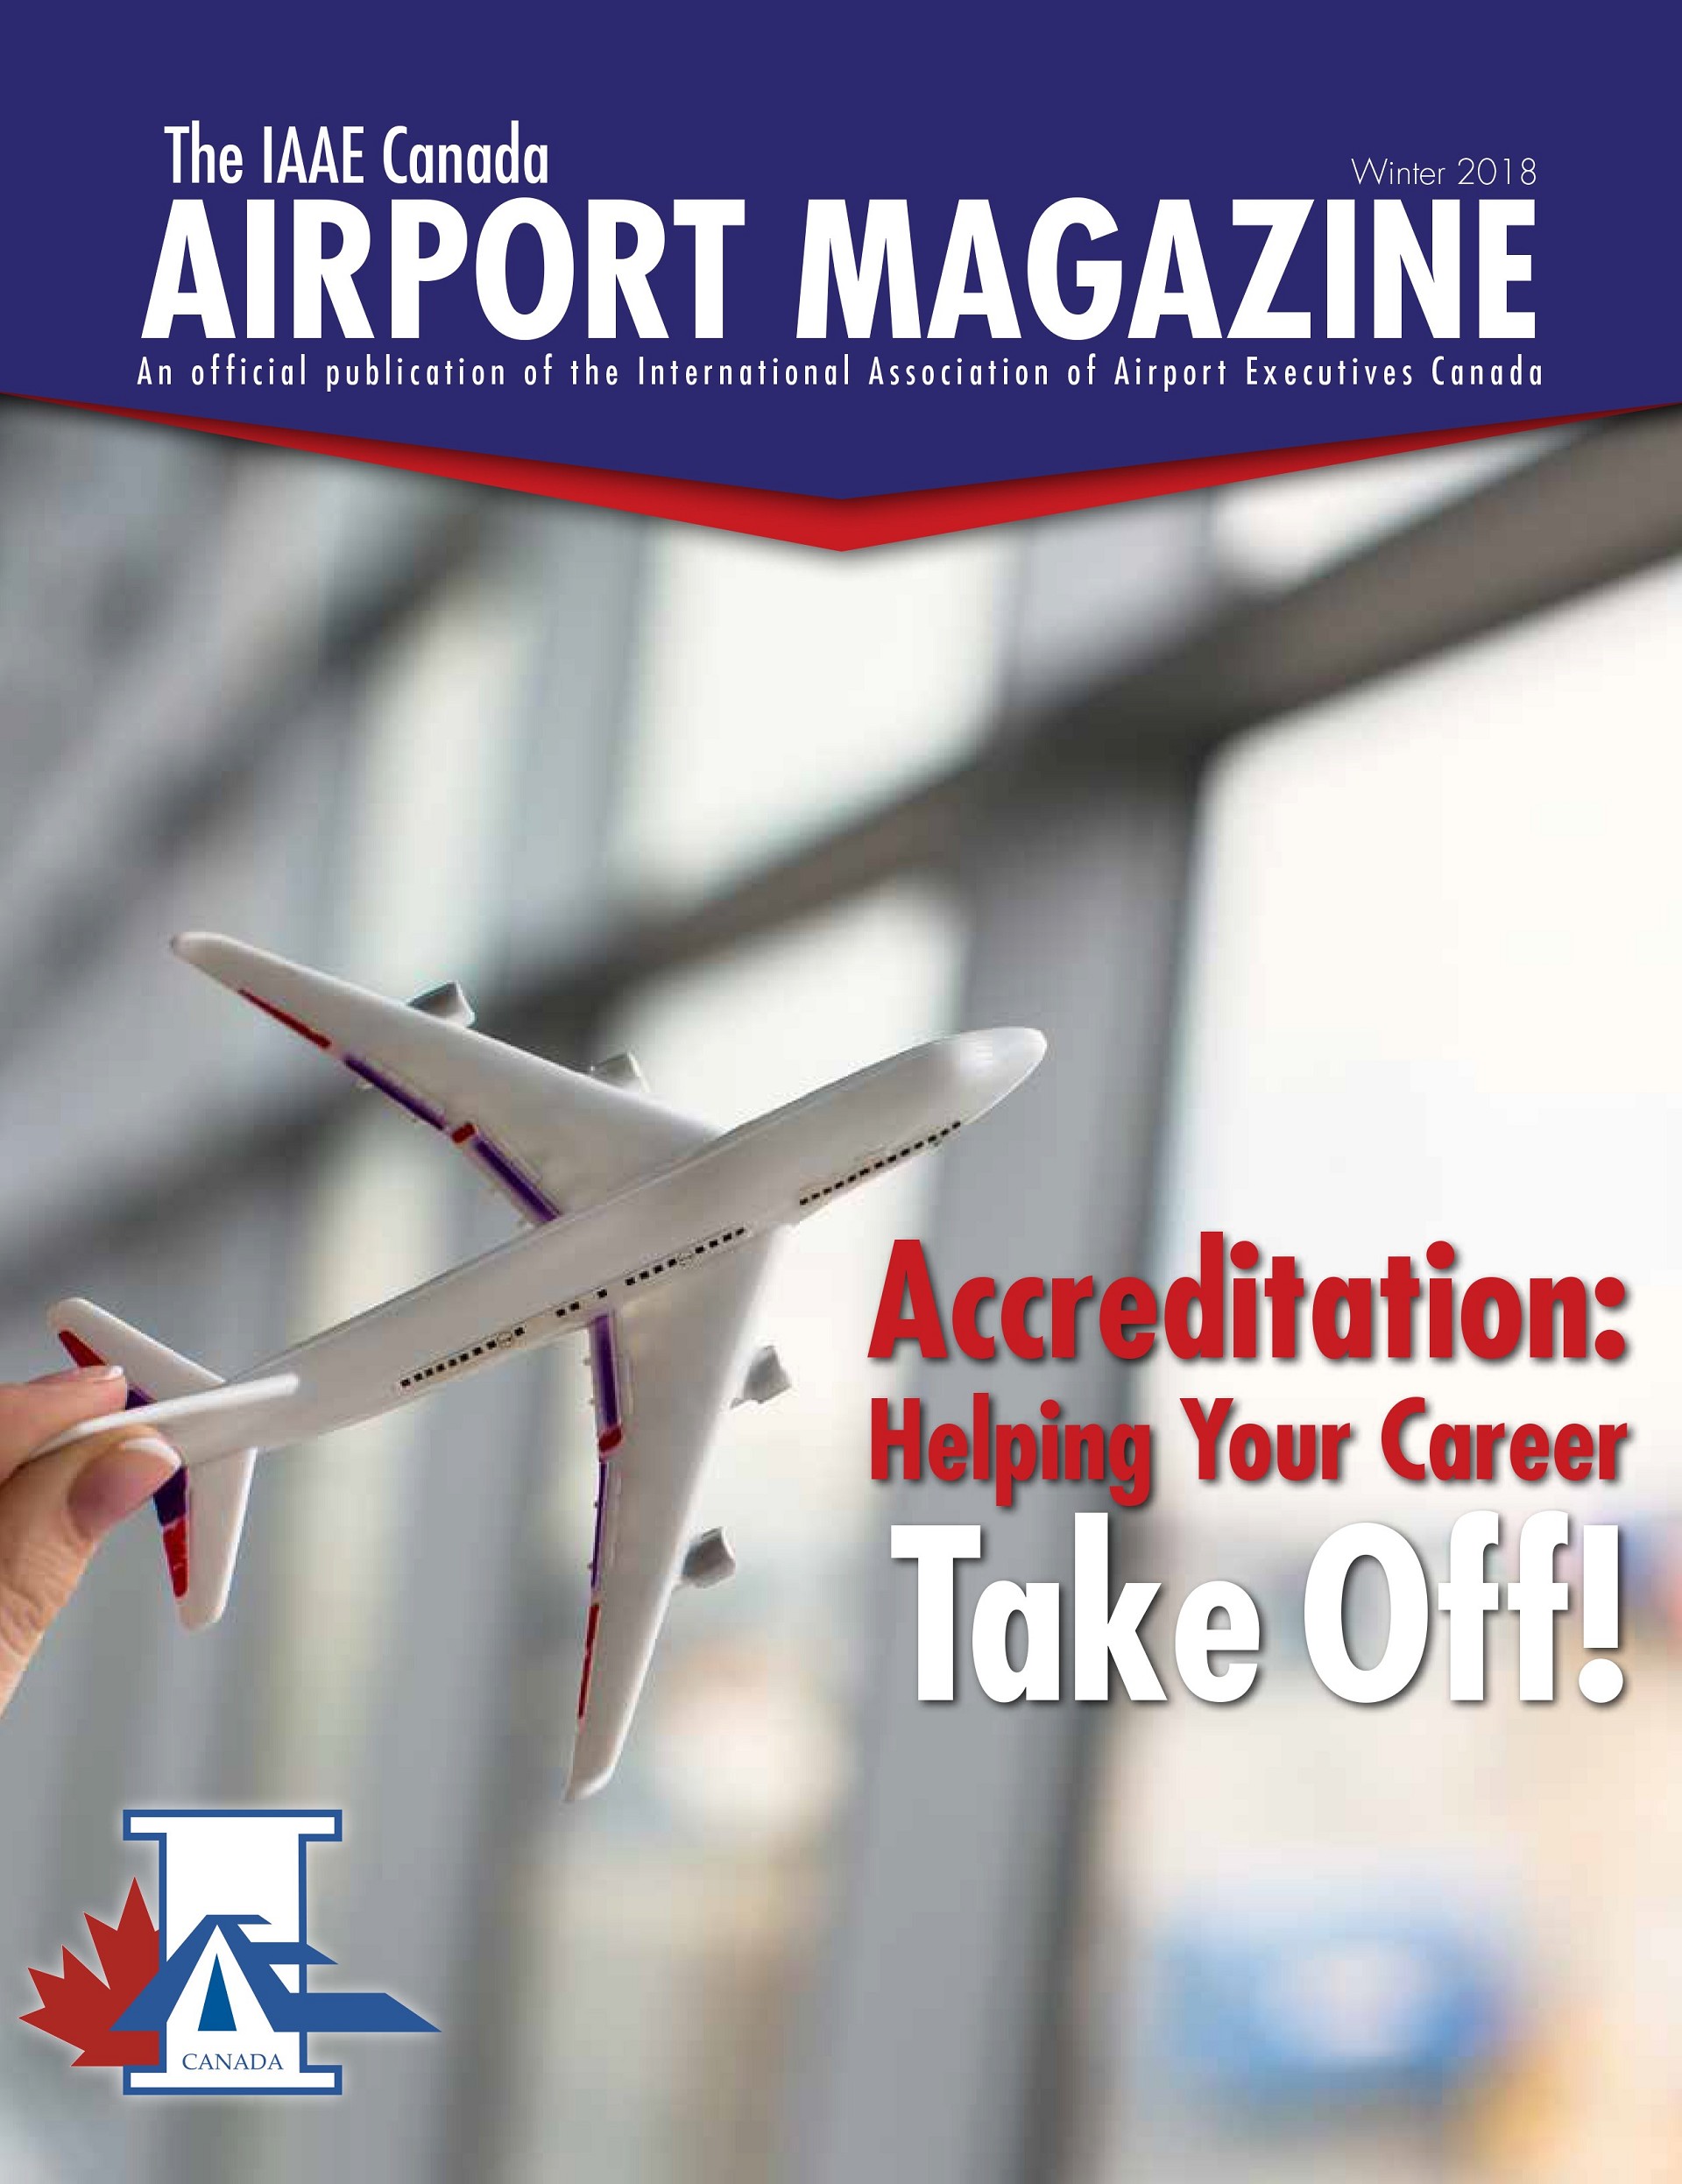 winter 2018, accreditation: helping your career take off!